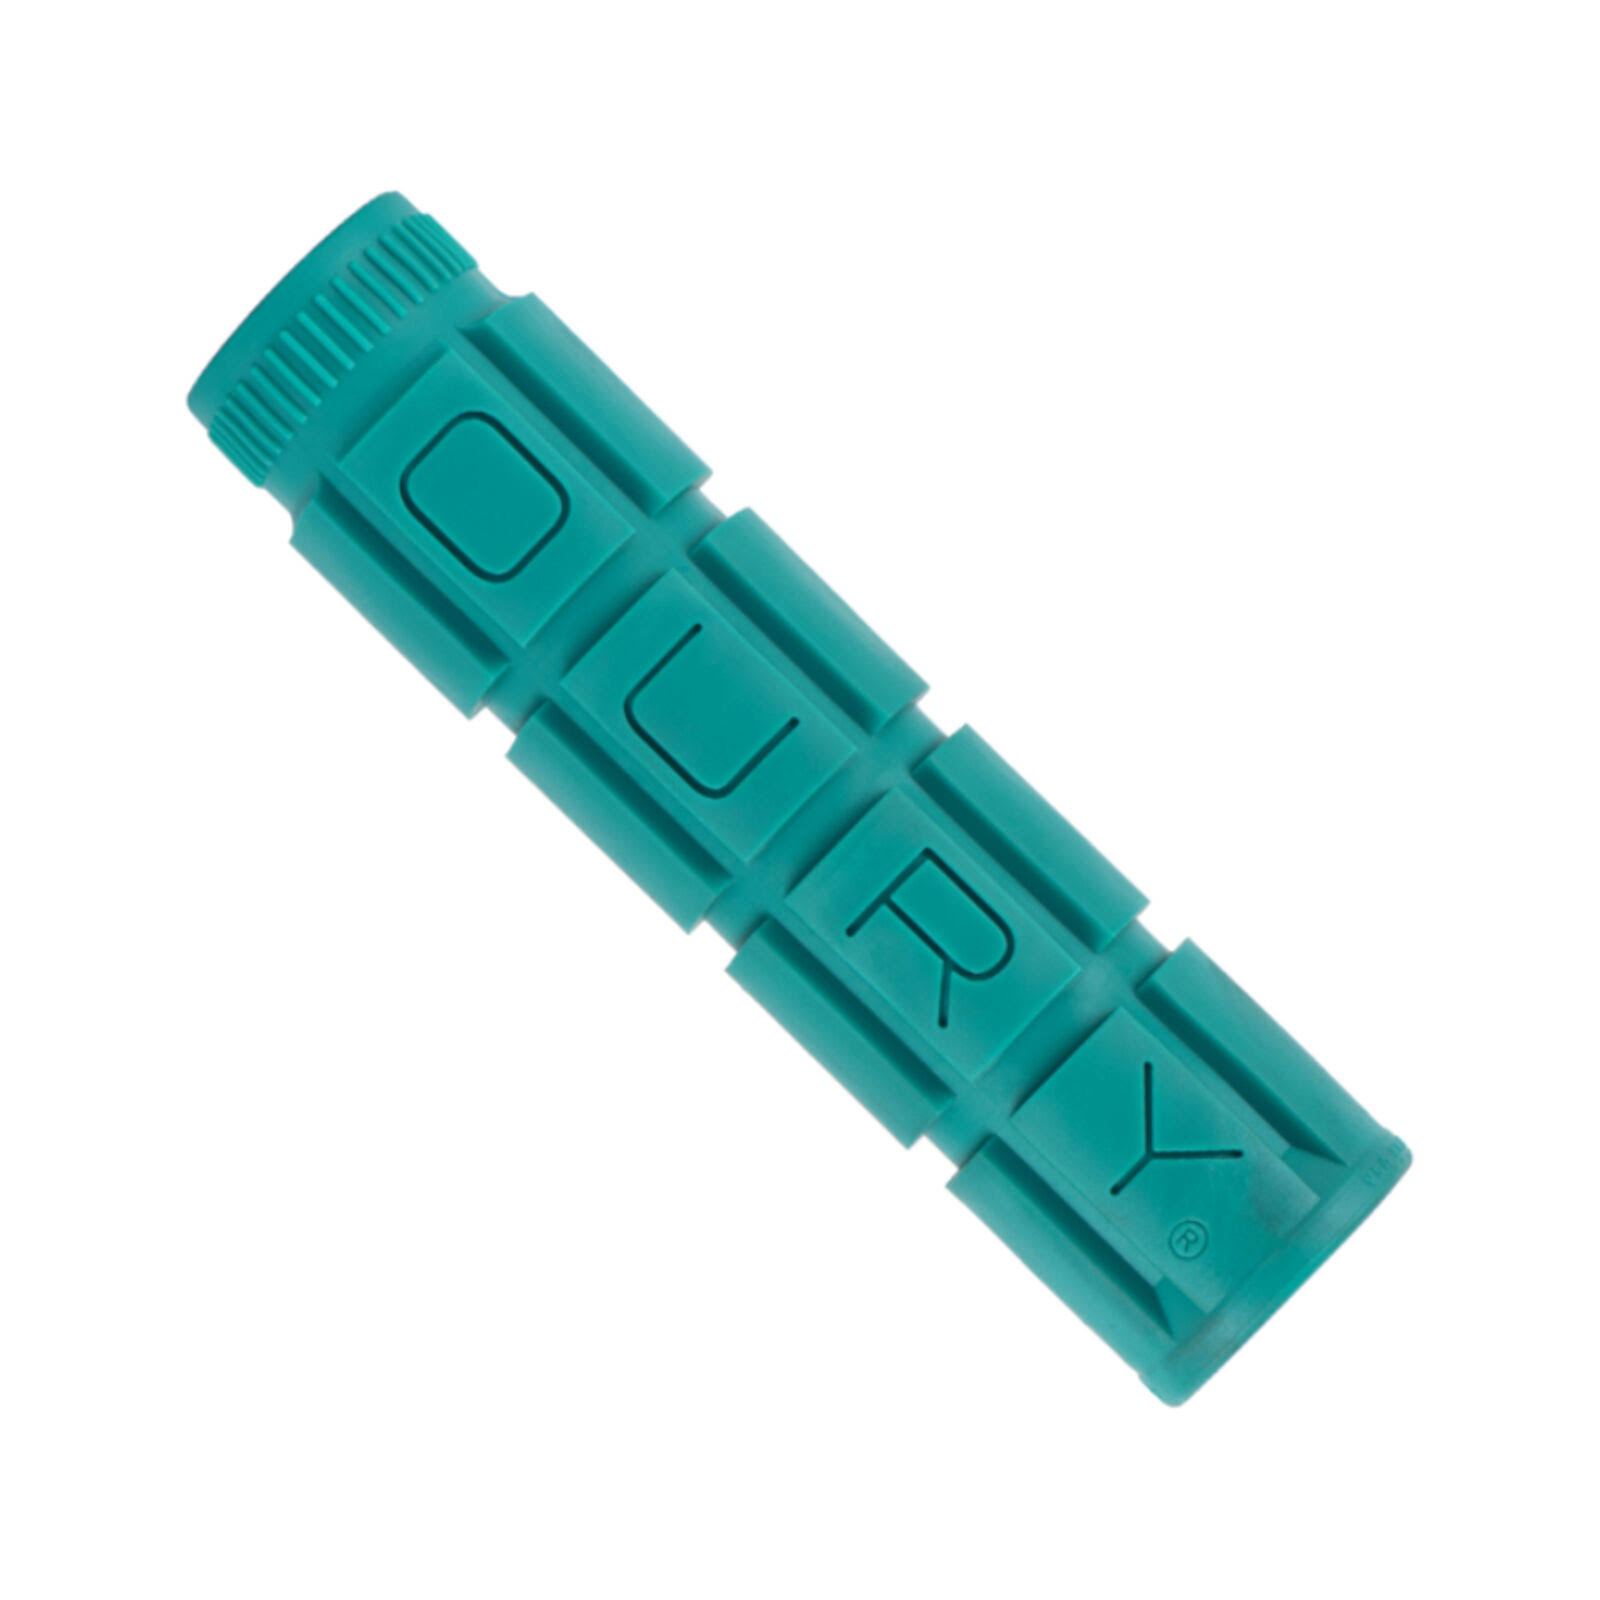 Lizard Skins Oury V2 Single Compound Grips-Teal